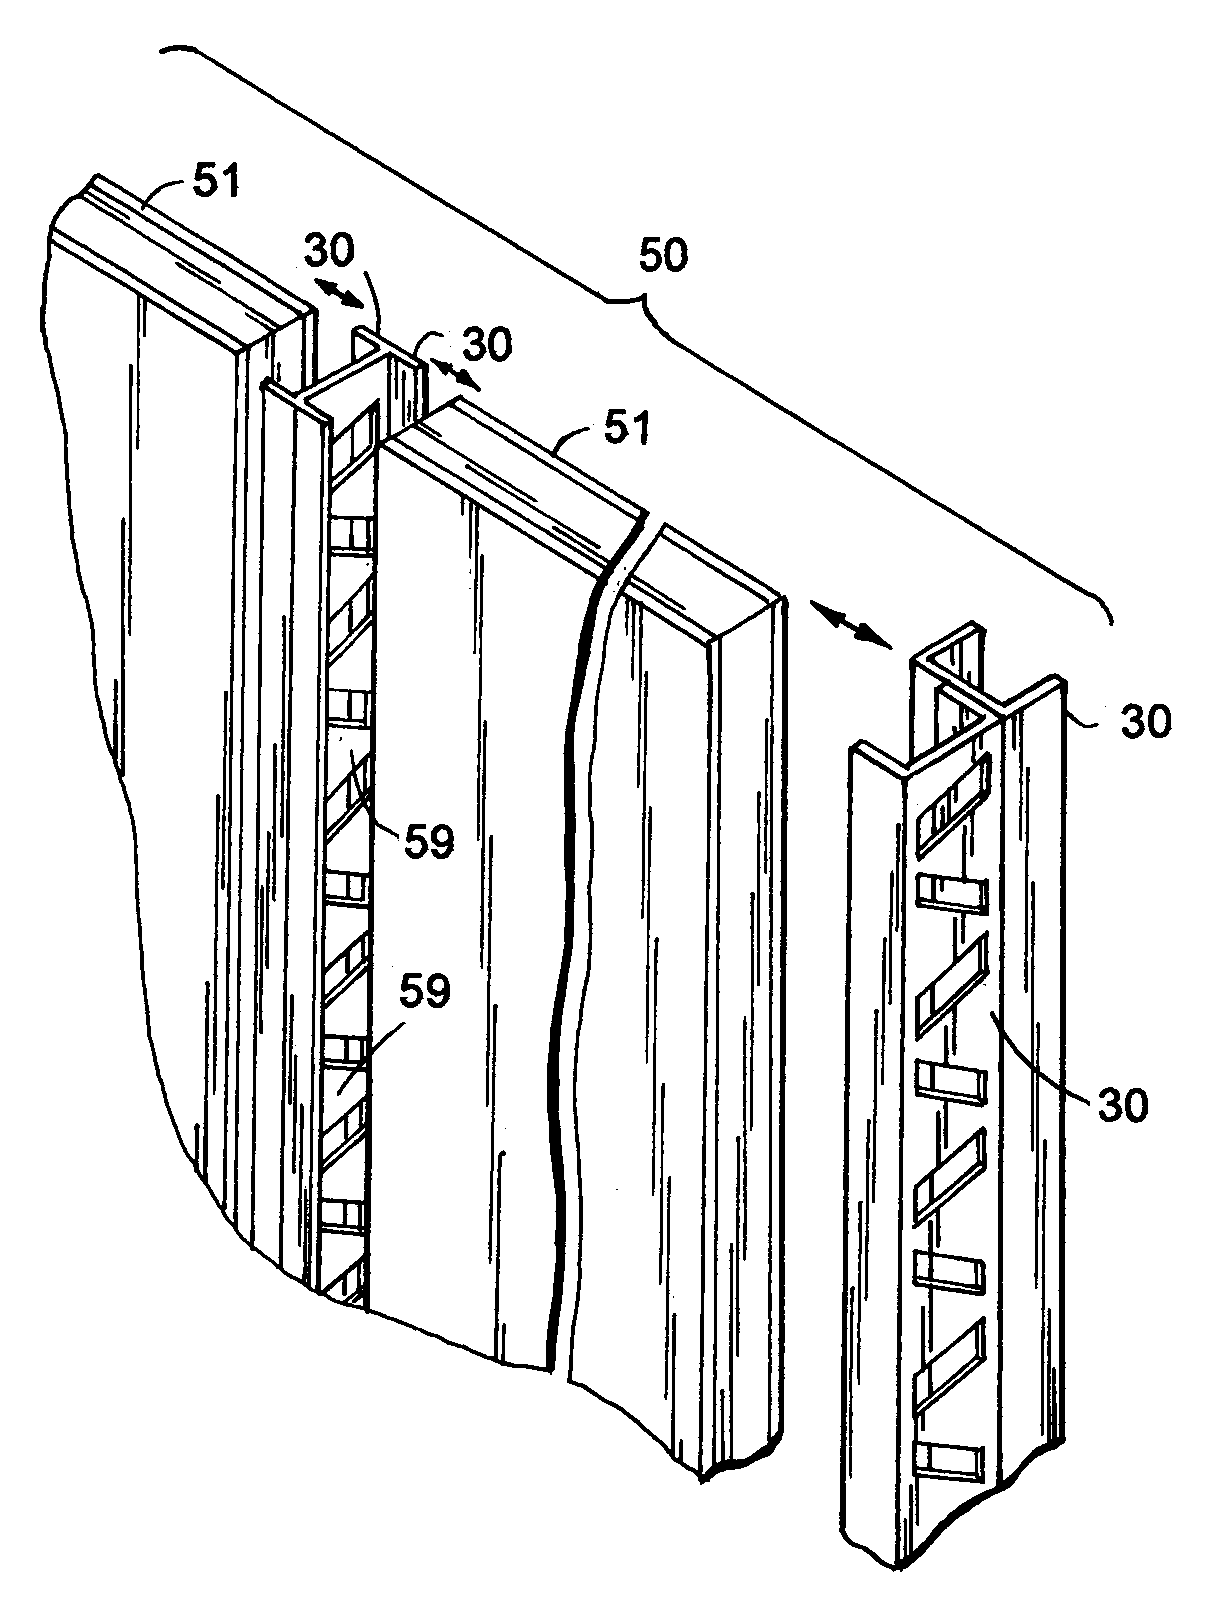 Thermal stud or plate for building wall